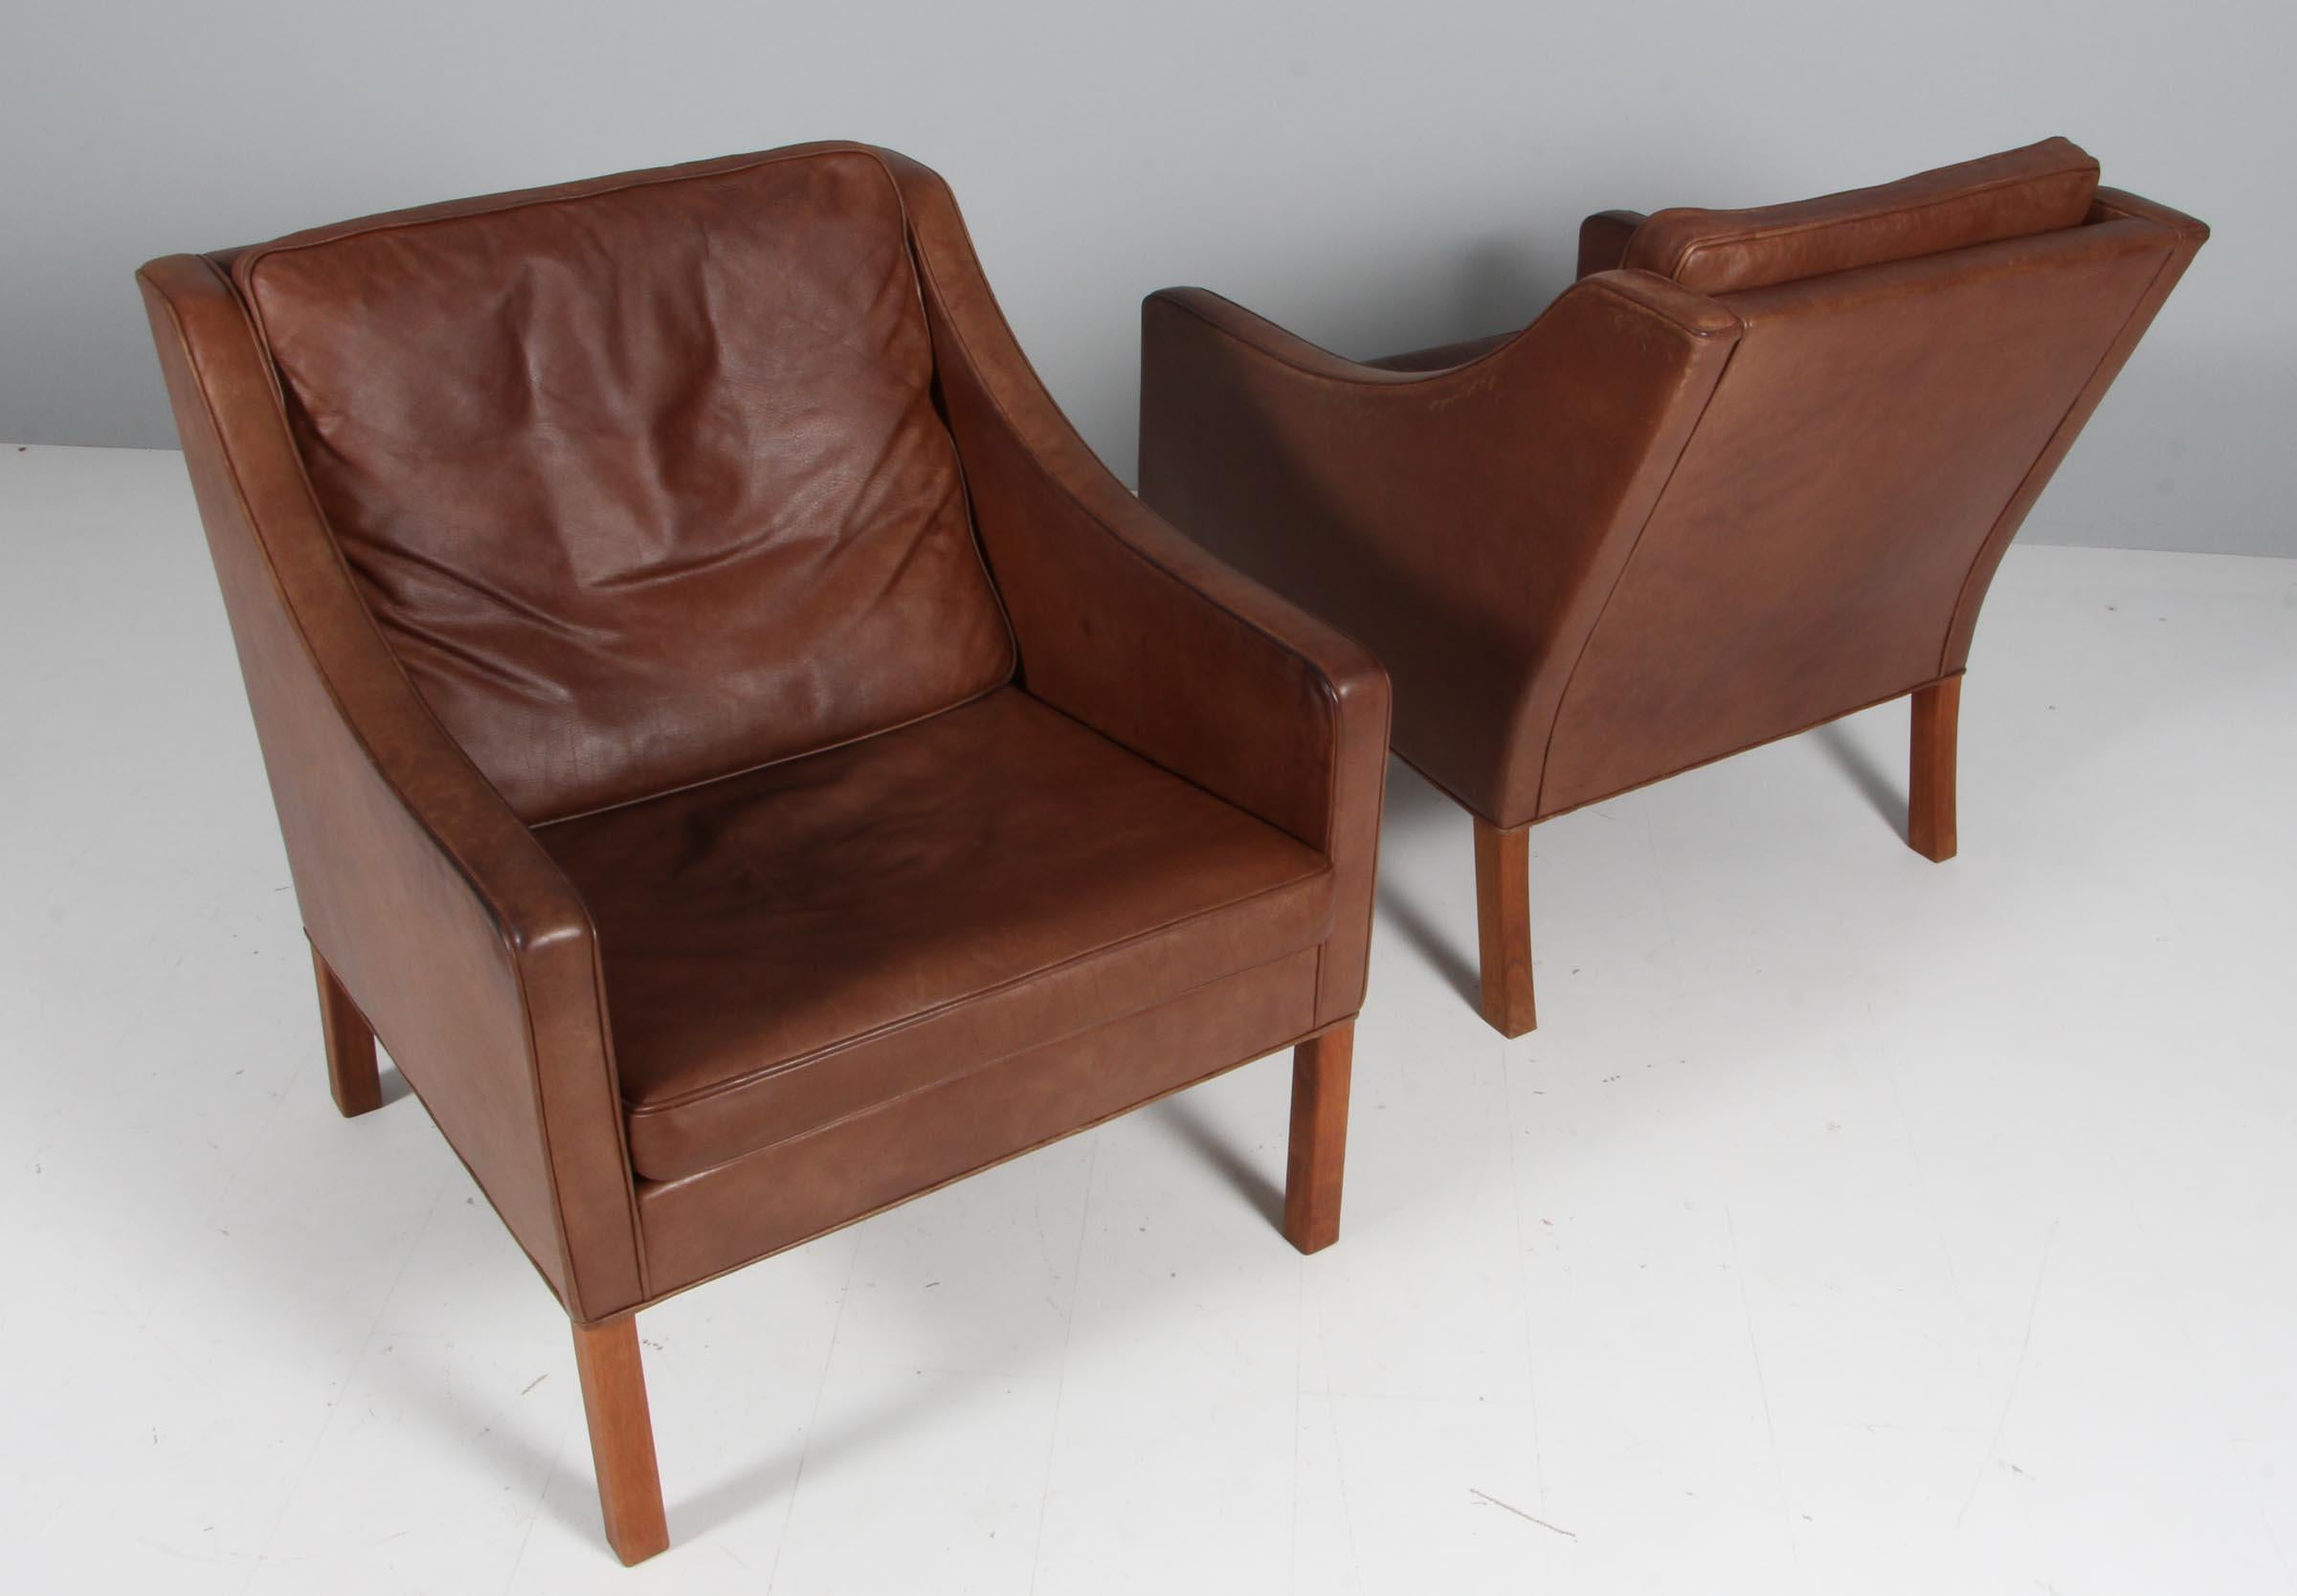 Børge Mogensen set of lounge chairs original upholstered with patinated brown leather.

Legs of mahogany.

Model 2207, made by Fredericia furniture.